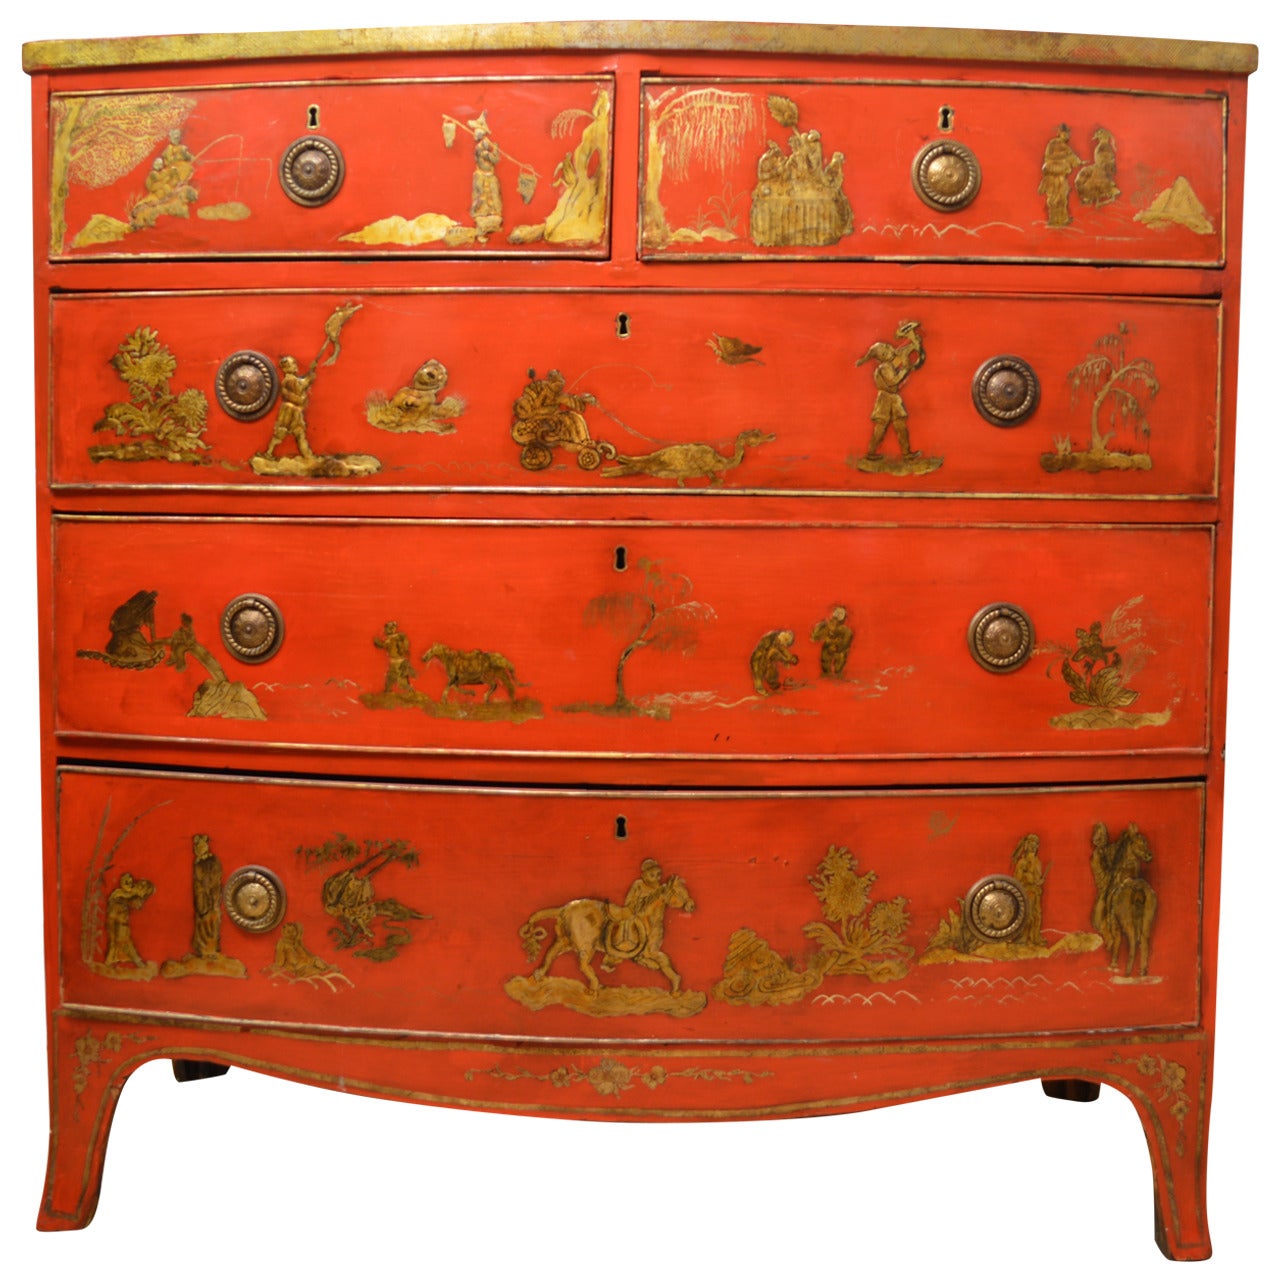 19th Century English Red Lacquer Hepplewhite Bow-Front Chest with Chinoiserie